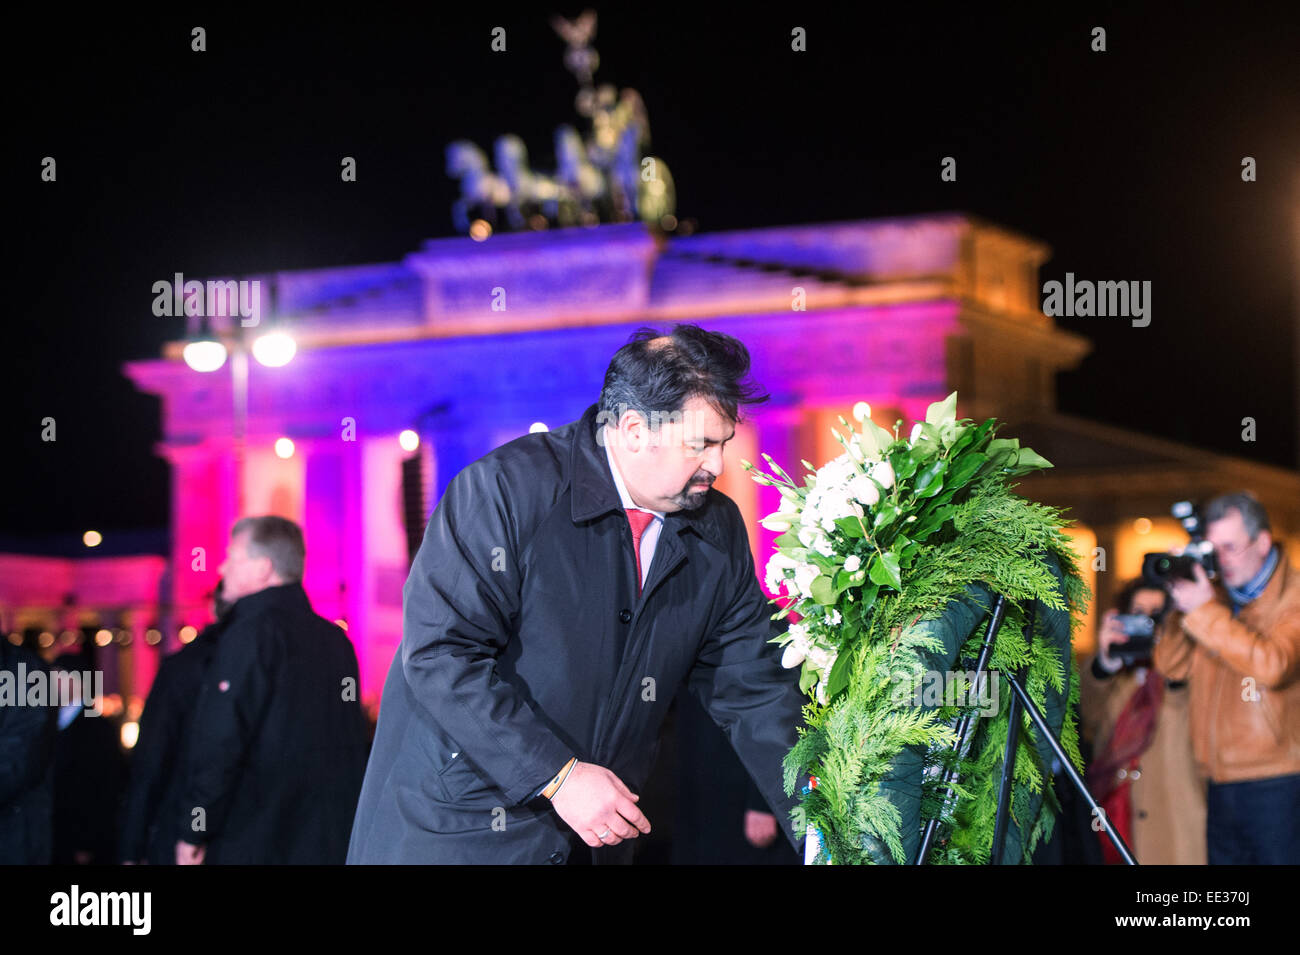 Berlin, Germany. 13th Jan, 2015. Chairman of the Central Committee of Muslims in Germany, Aiman Mazyek, straightens the ribbon on a wreath in front of the French Embassy during a vigil for the victims of the attacks in France at the Brandenburg Gate in Berlin, Germany, 13 January 2015. The Central Committee of Muslims and the Turkish community have invoked the slogan 'Stand together - Show face' for the rally against Islamist terror and for the peaceful co-existence of the religions. Photo: MAURIZIO GAMBARINI/dpa/Alamy Live News Stock Photo